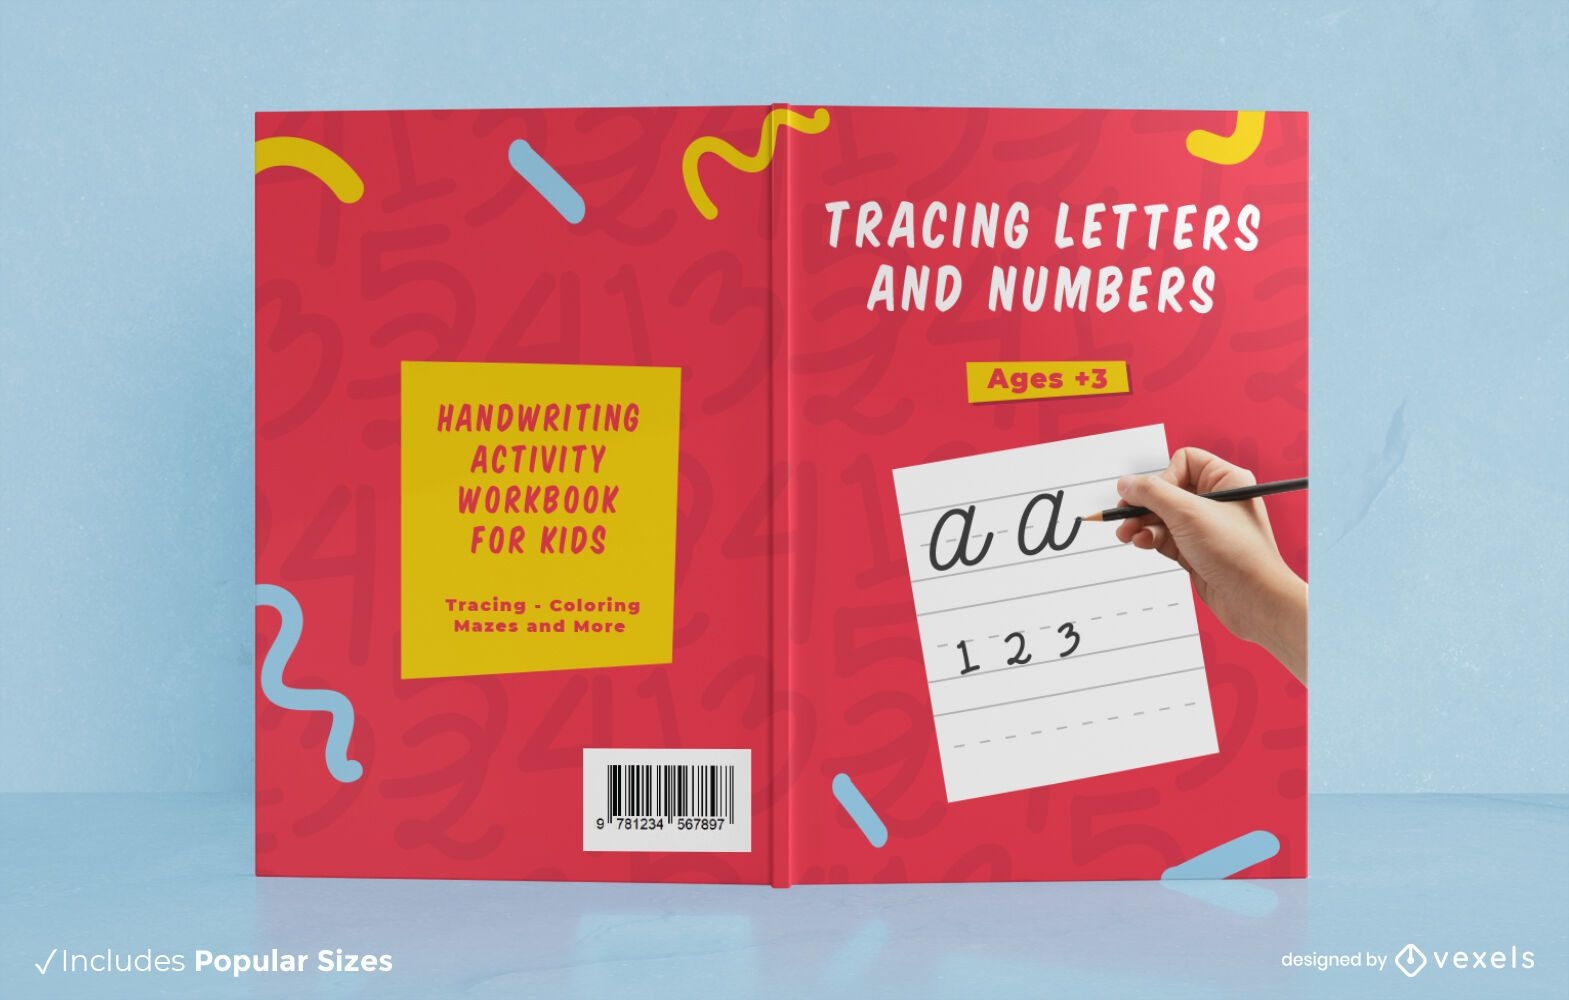 Tracing letters book cover design